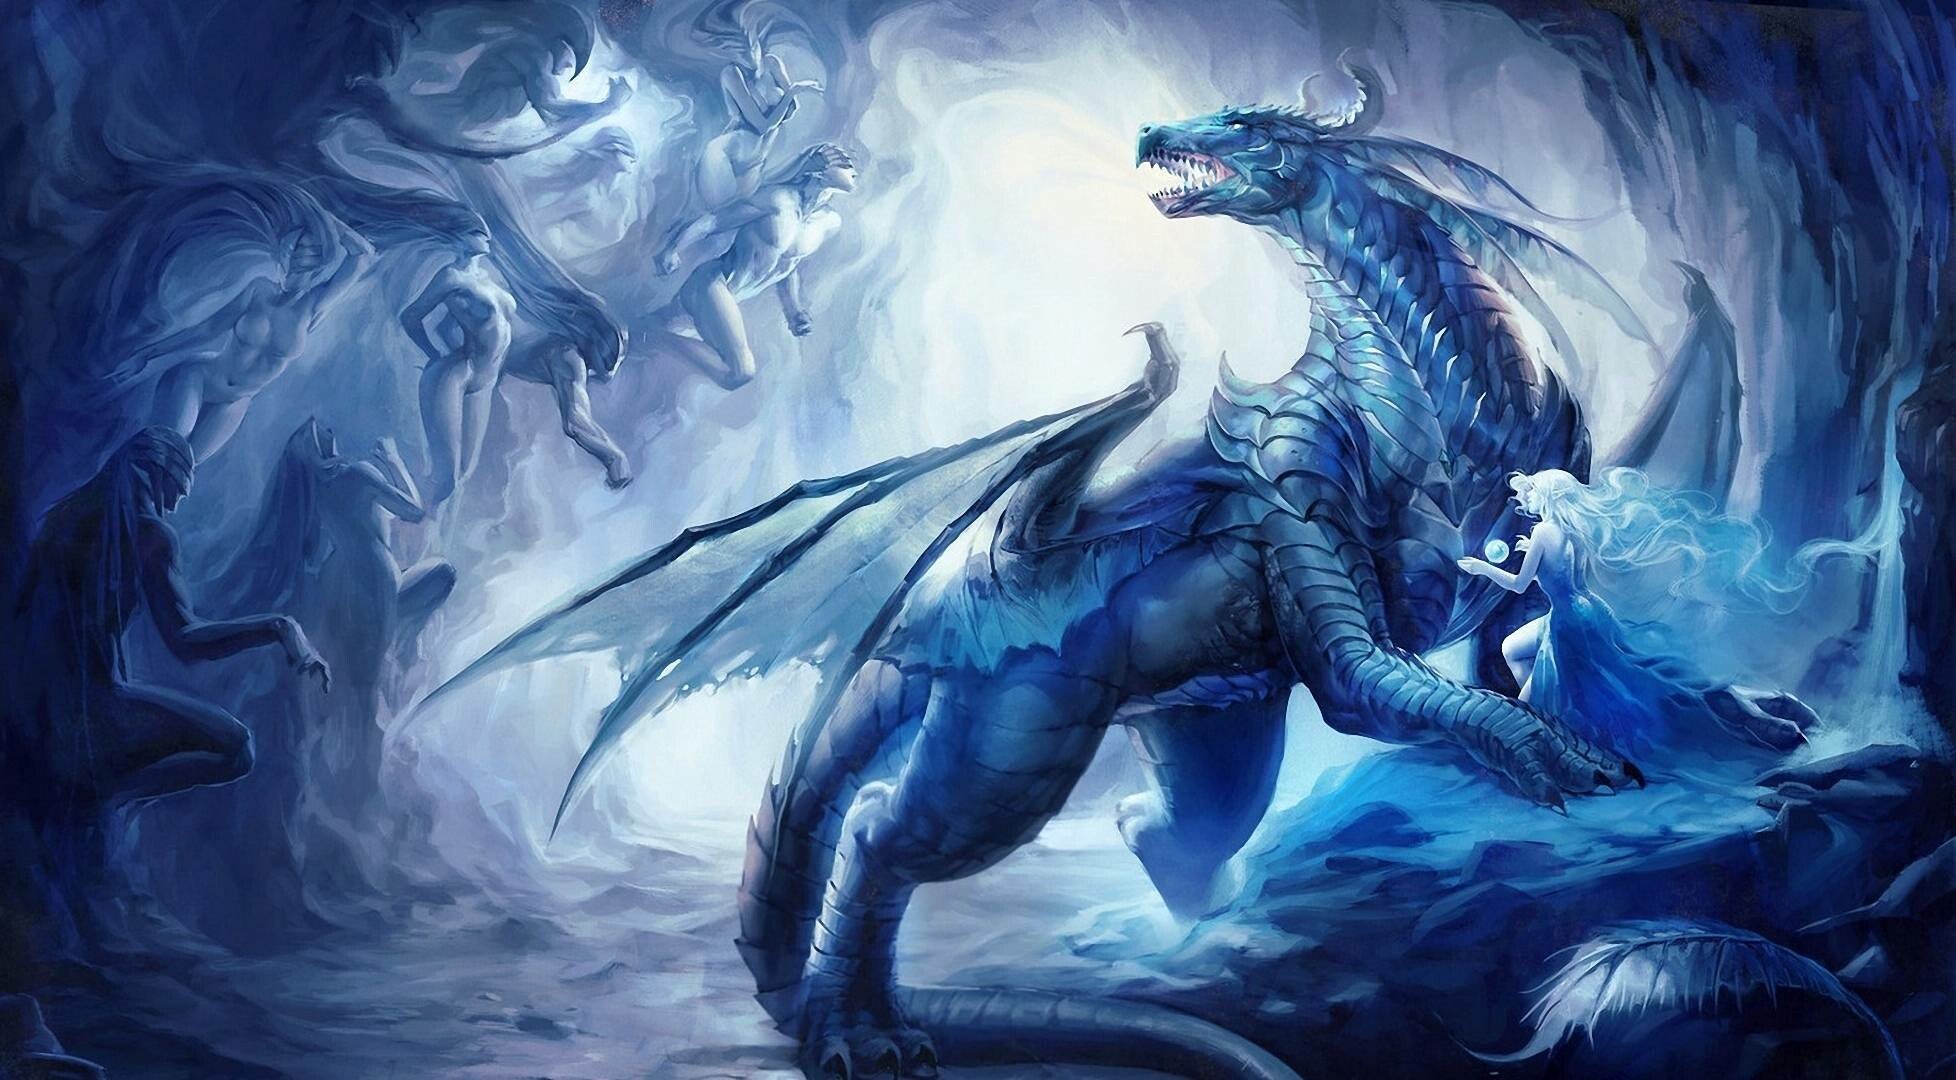 Ice Dragon Wallpaper: HD, 4K, 5K for PC and Mobile. Download free image for iPhone, Android